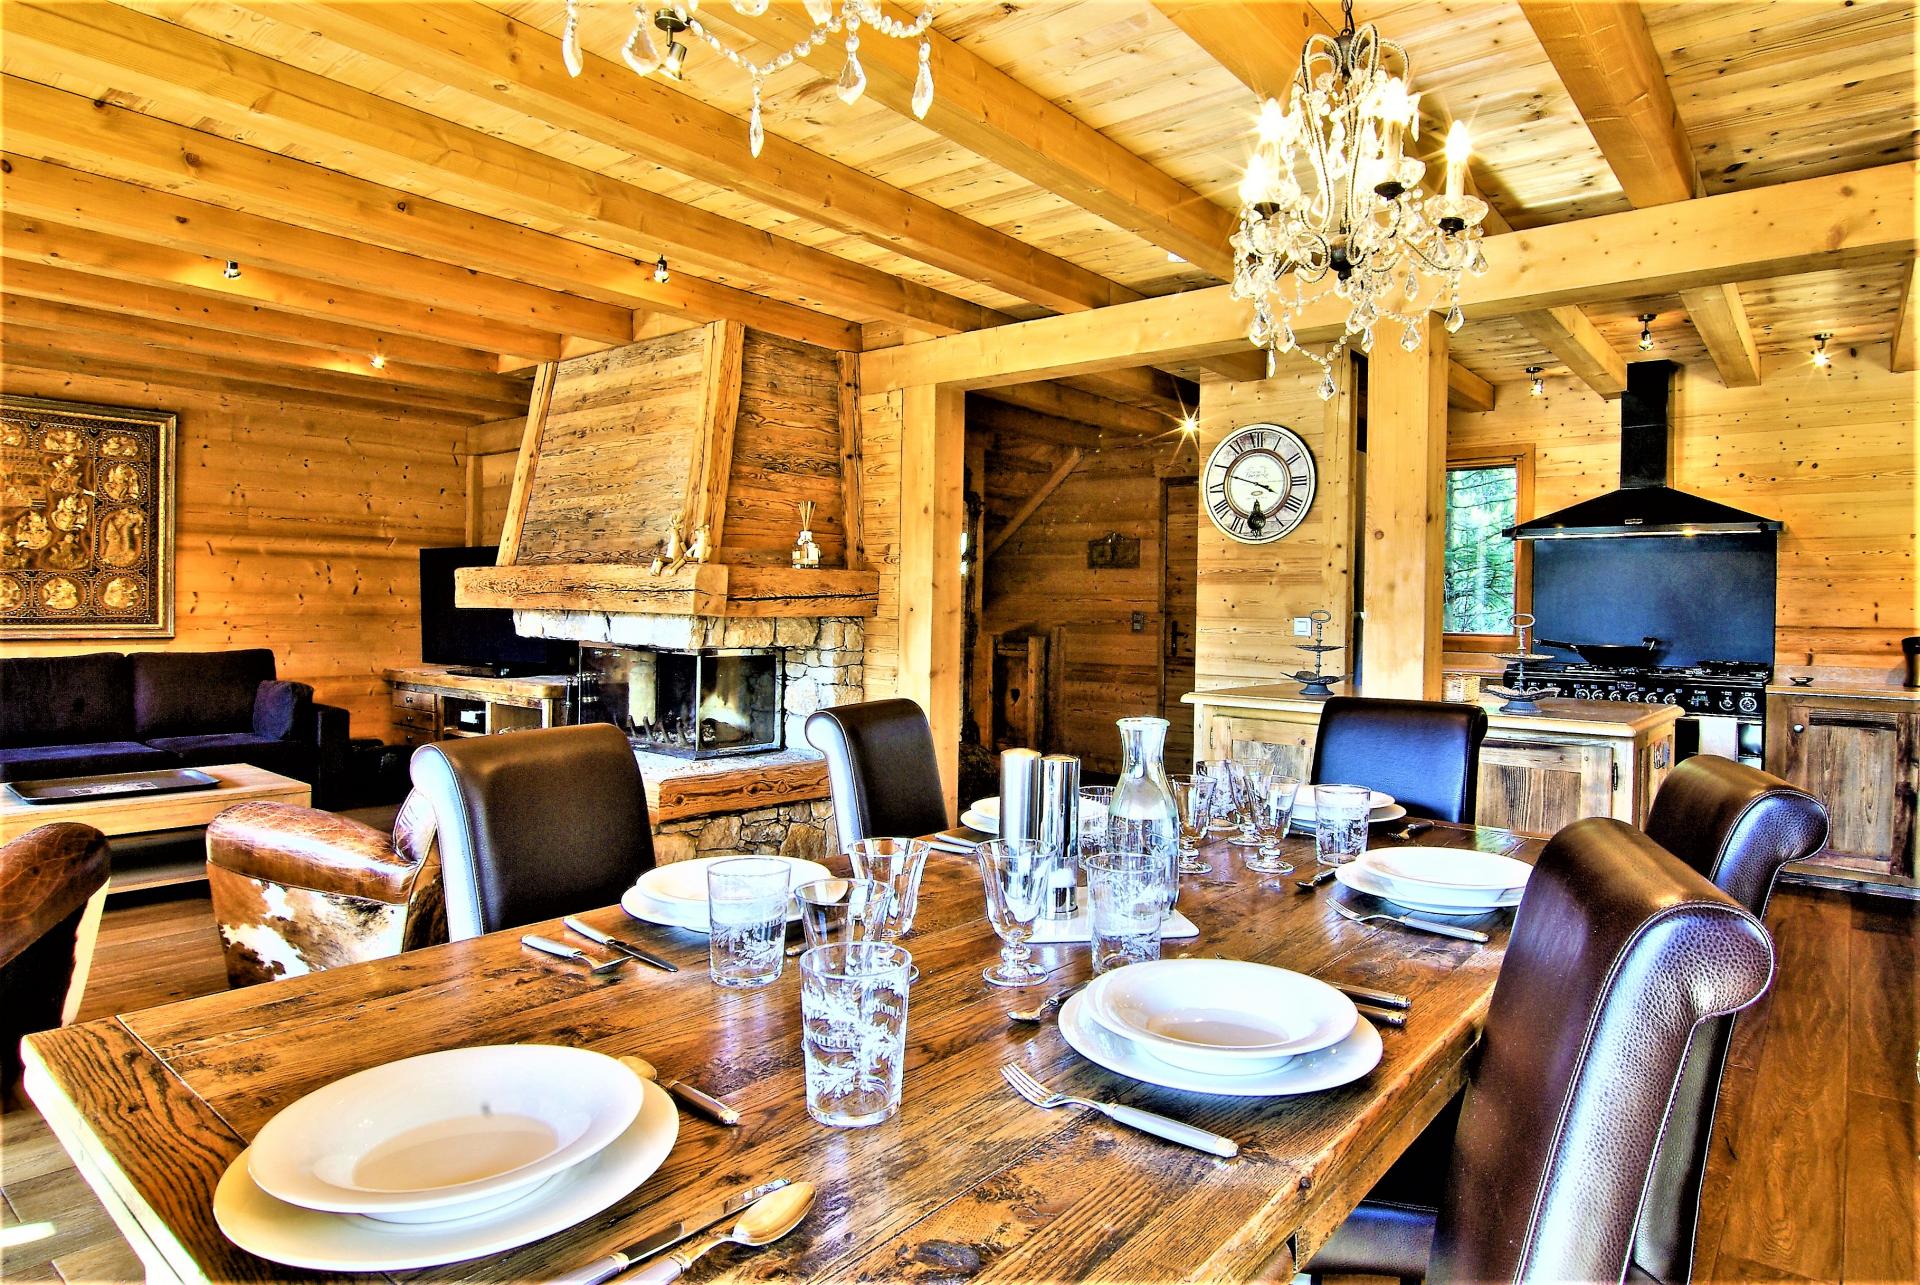 THE KITCHEN OPENS ON TO THE DINING AREA IN CHALET DES BOIS